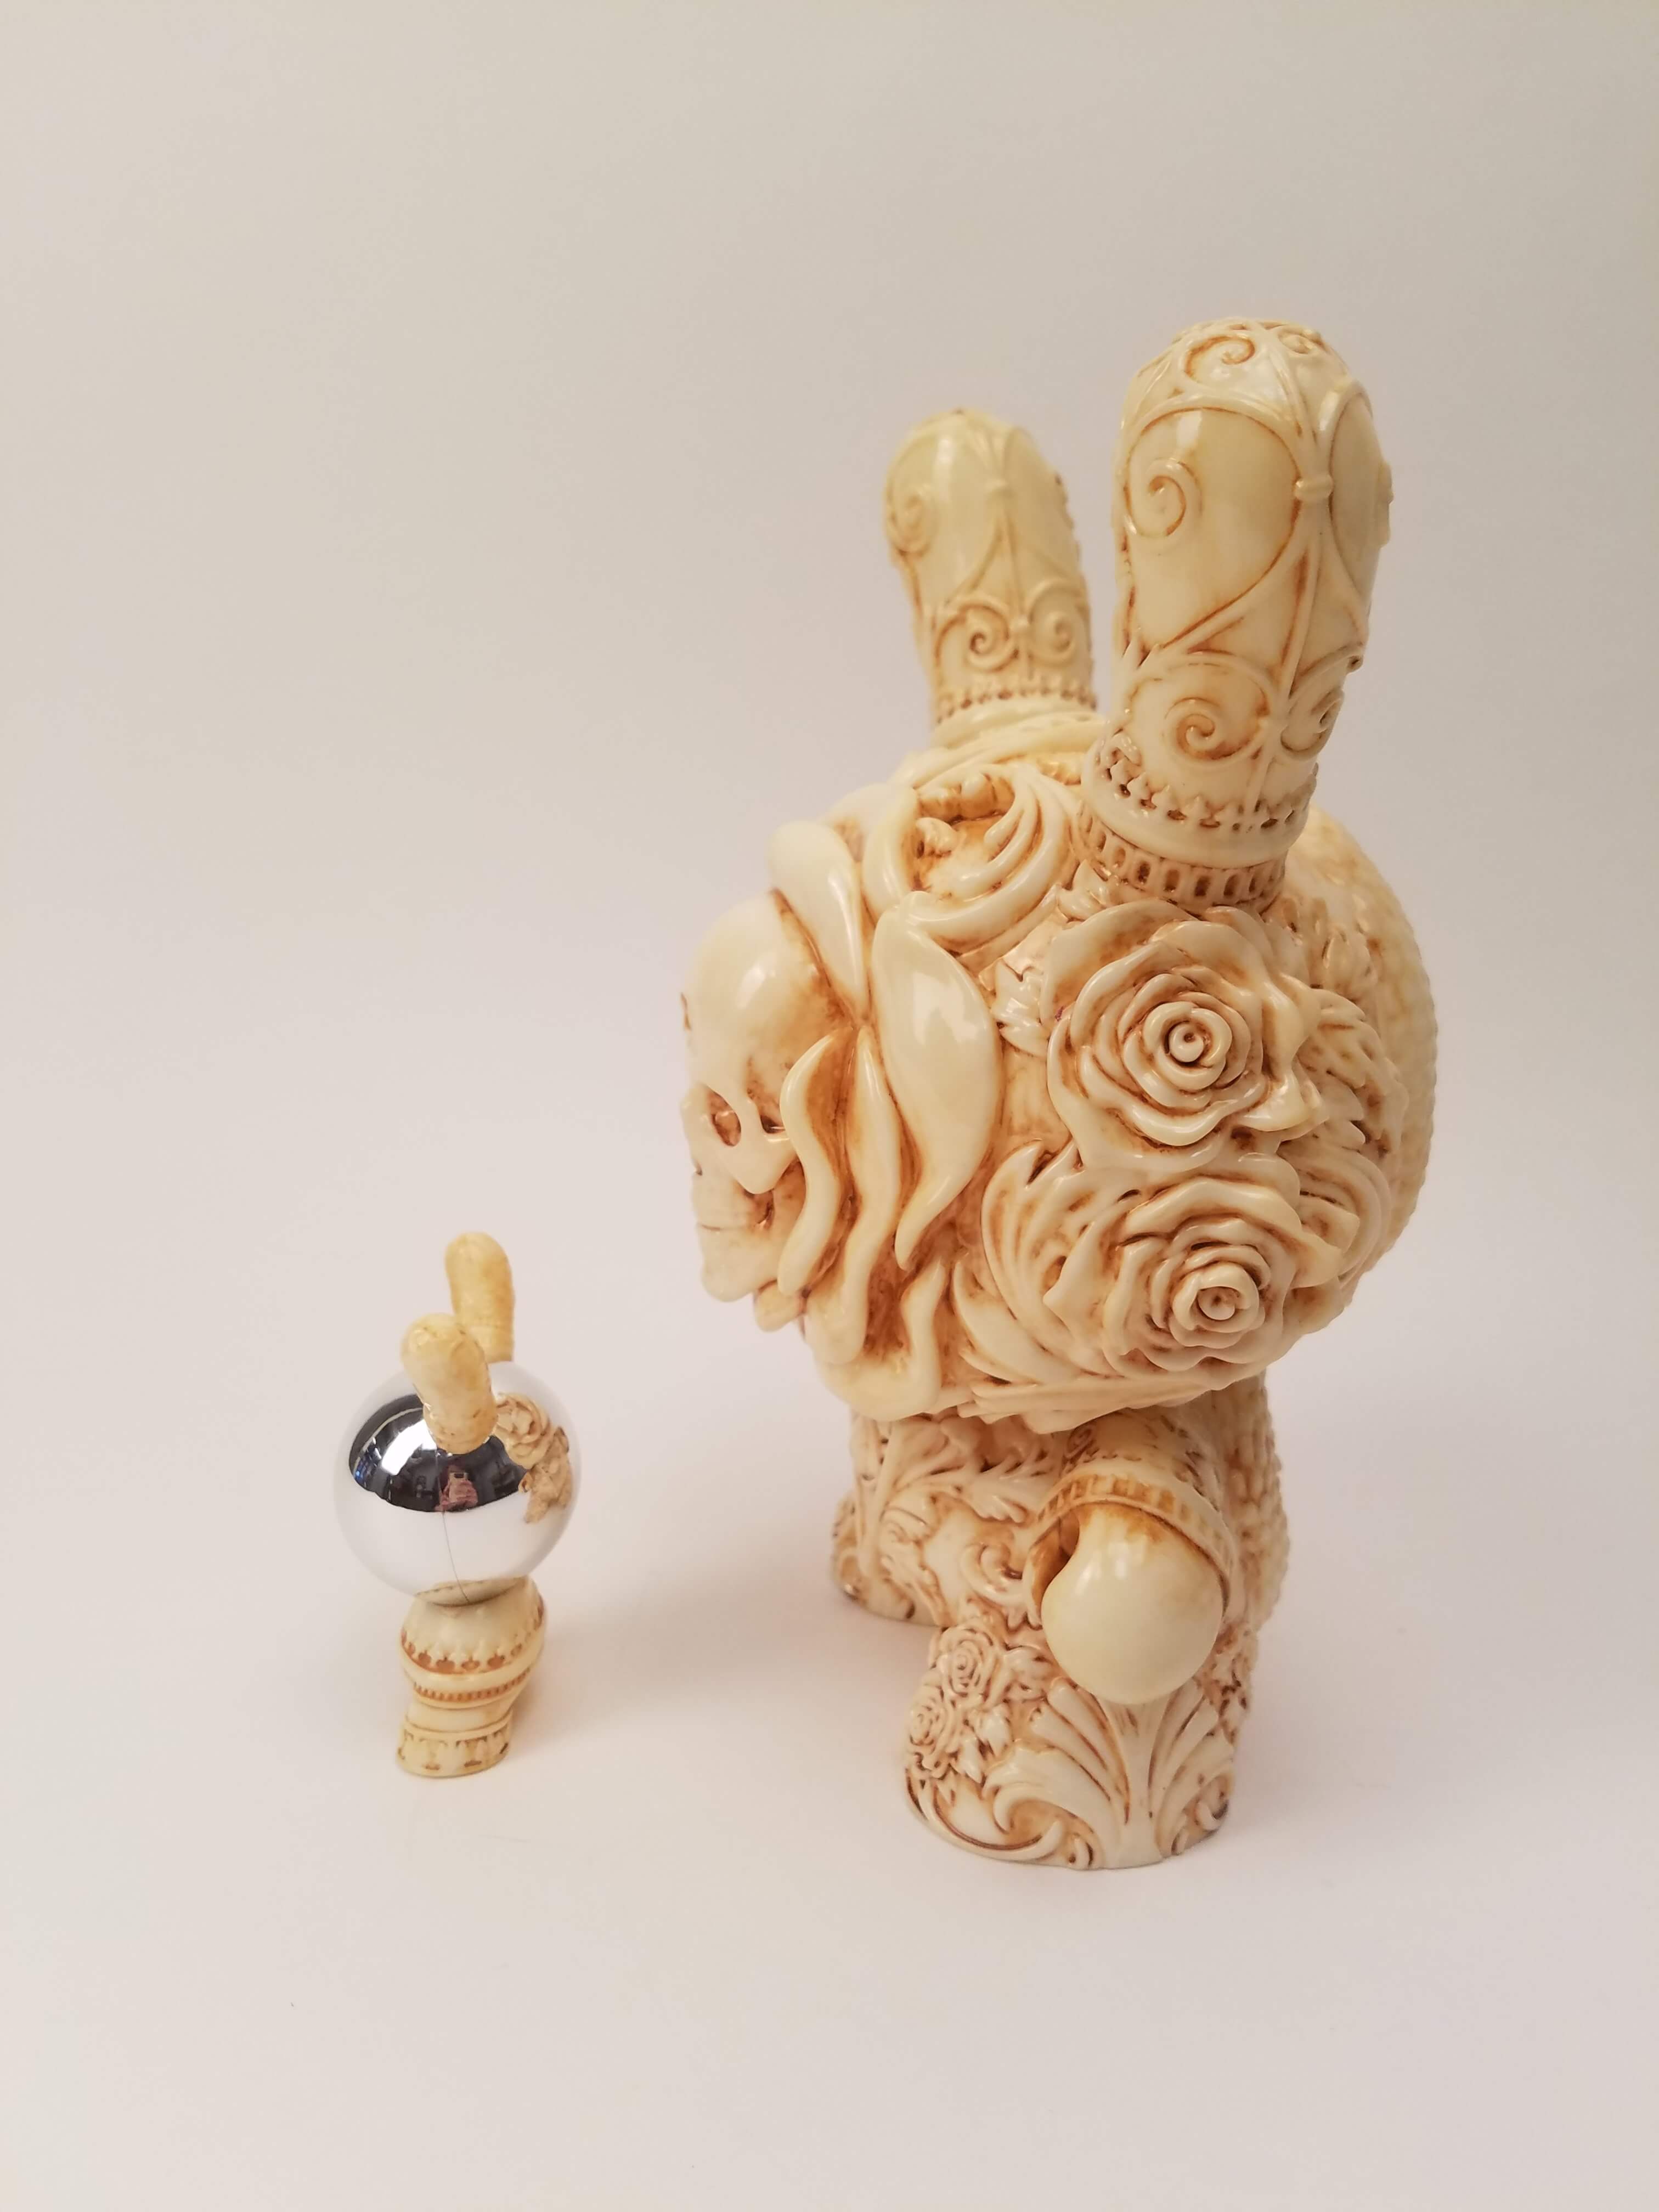 jryu-clairvoyant-dunny-2